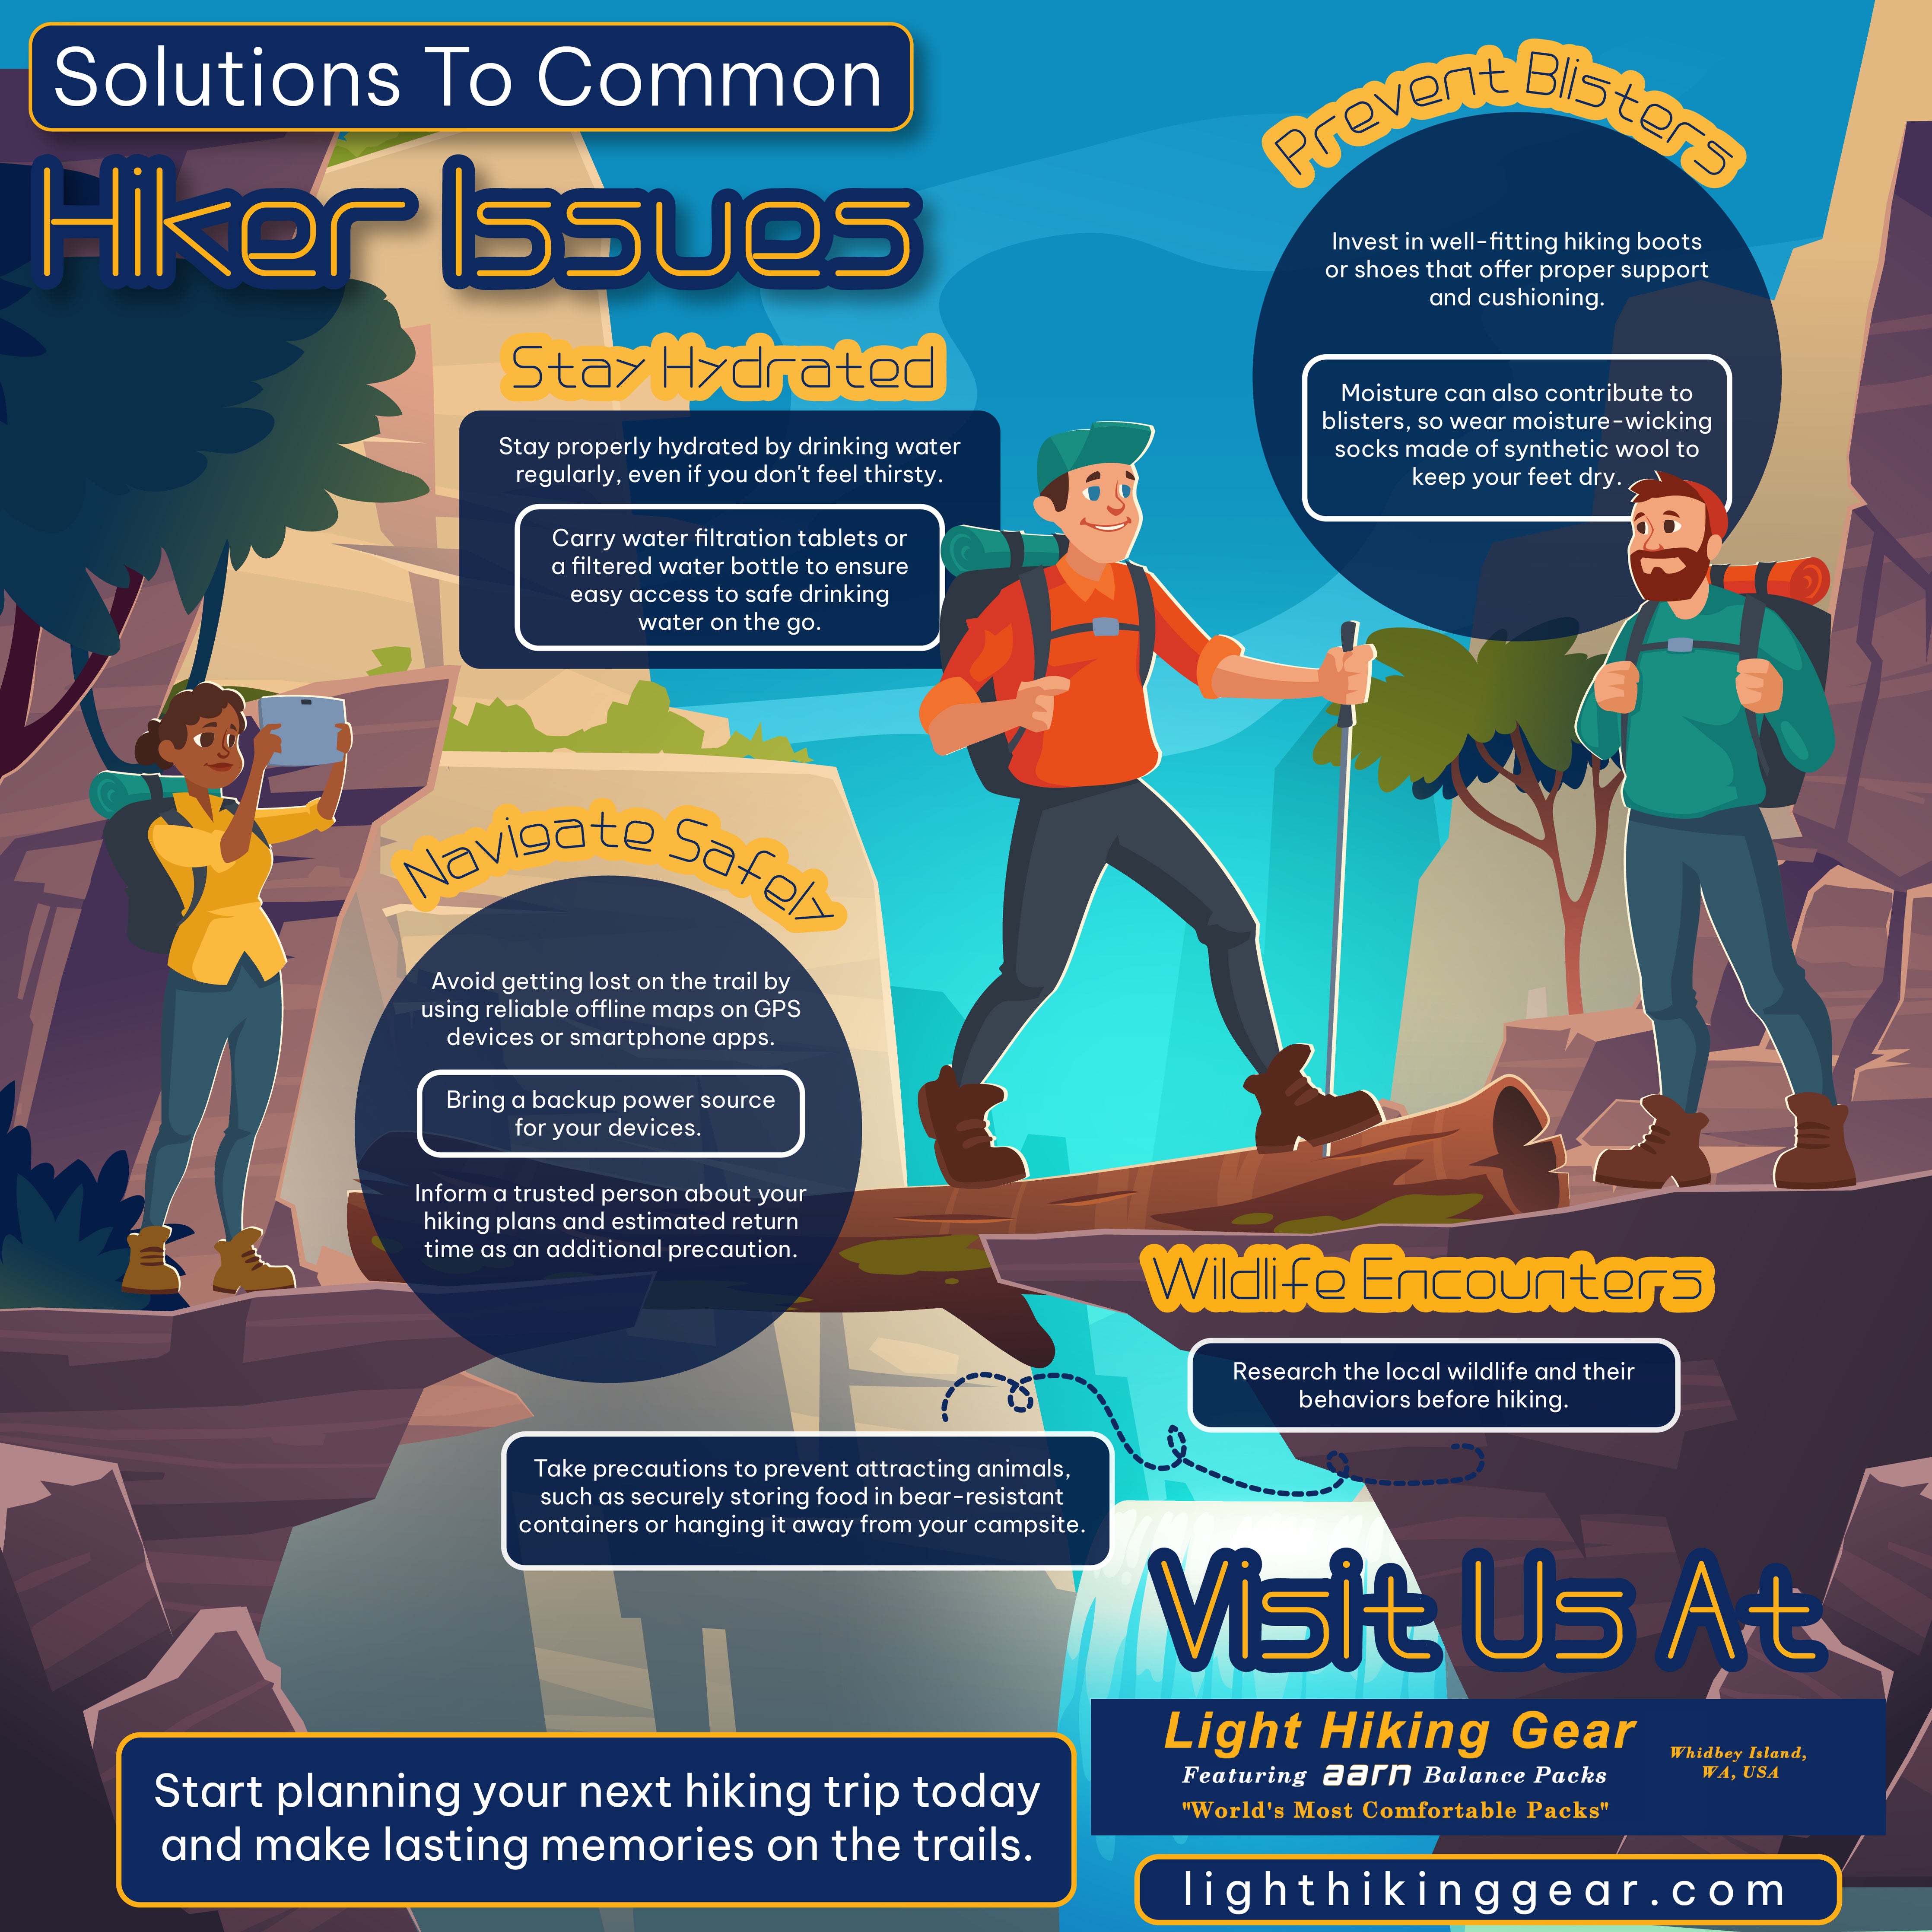 Solutions To Common Hiker Issues